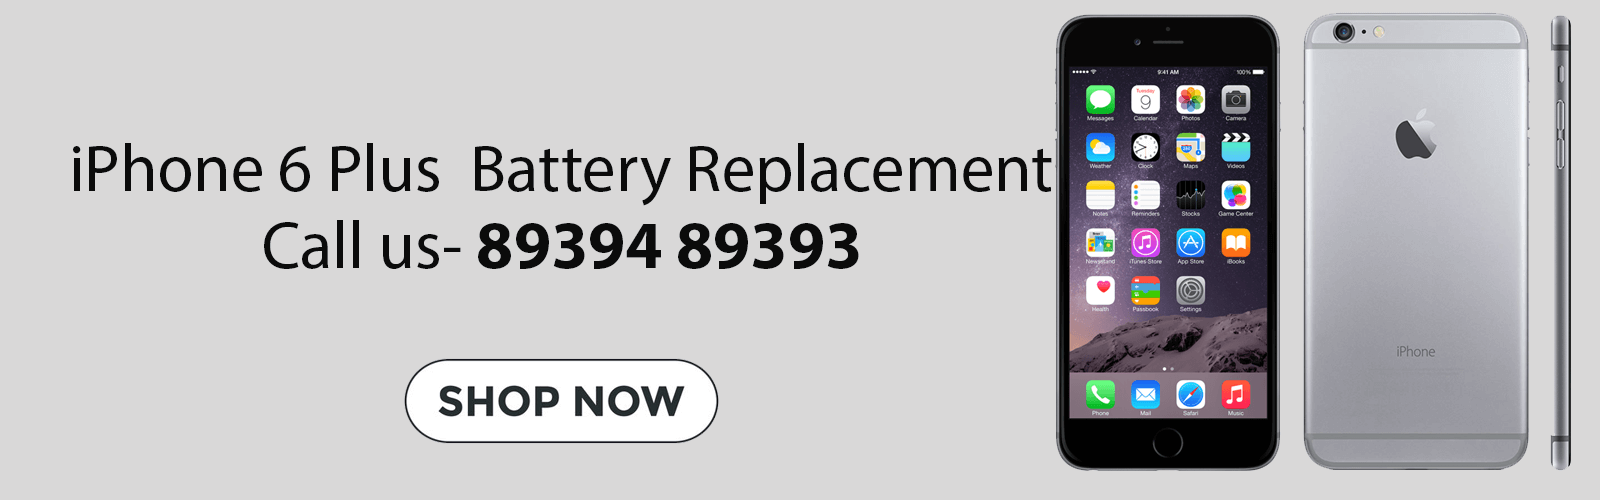 iPhone 6 Plus Battery Replacement Price Chennai